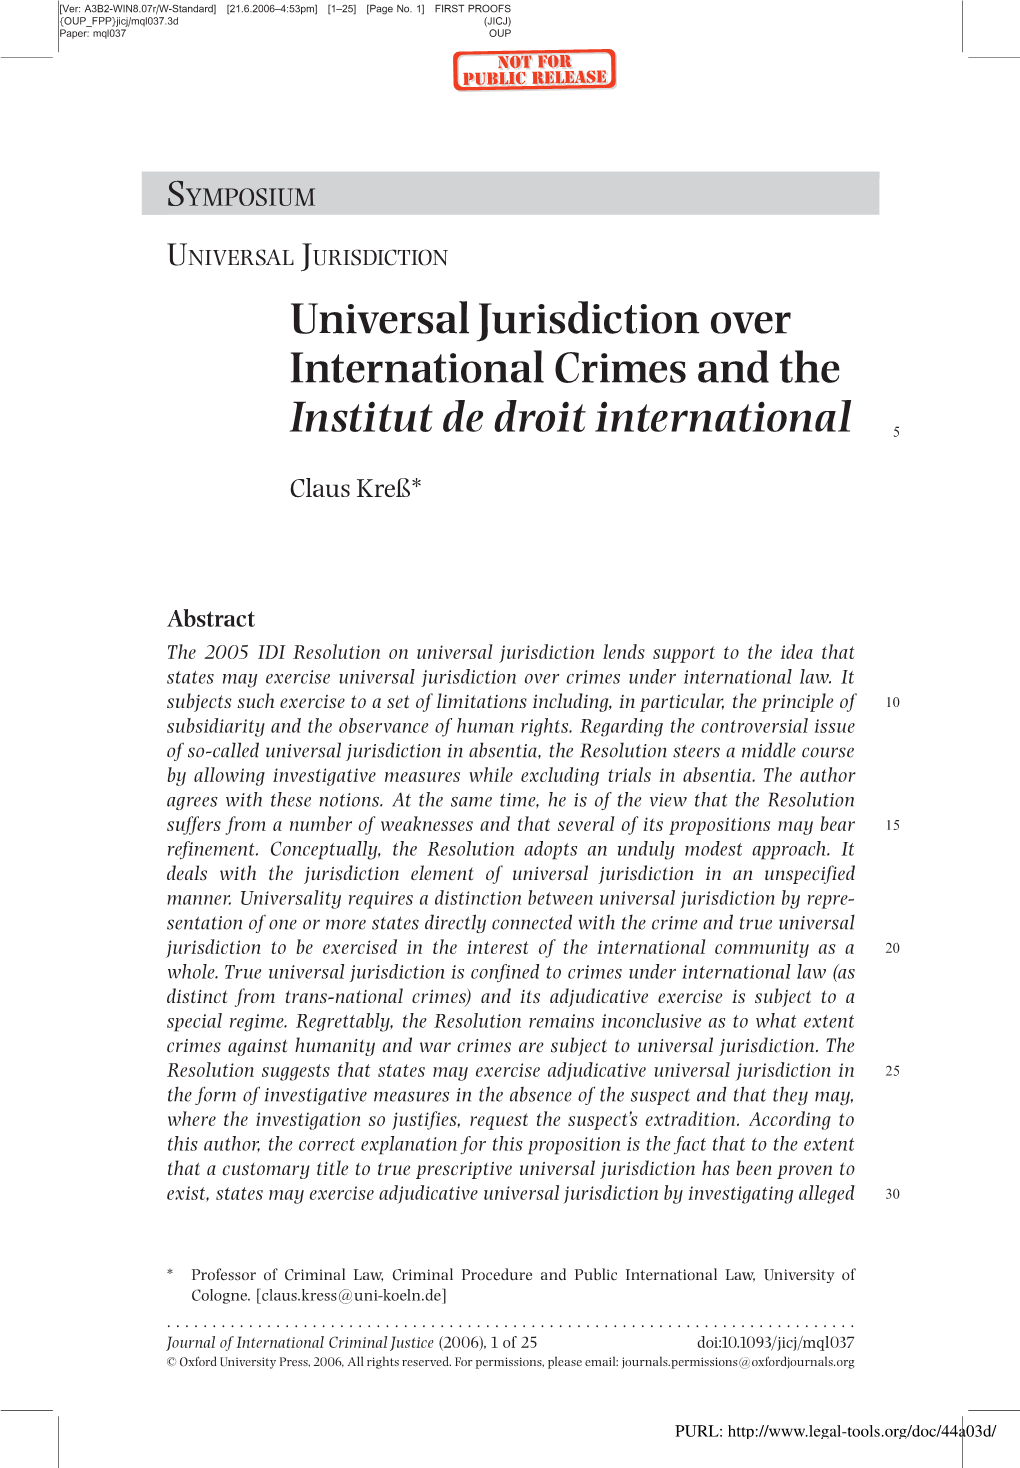 Universal Jurisdiction Over International Crimes and the Institut